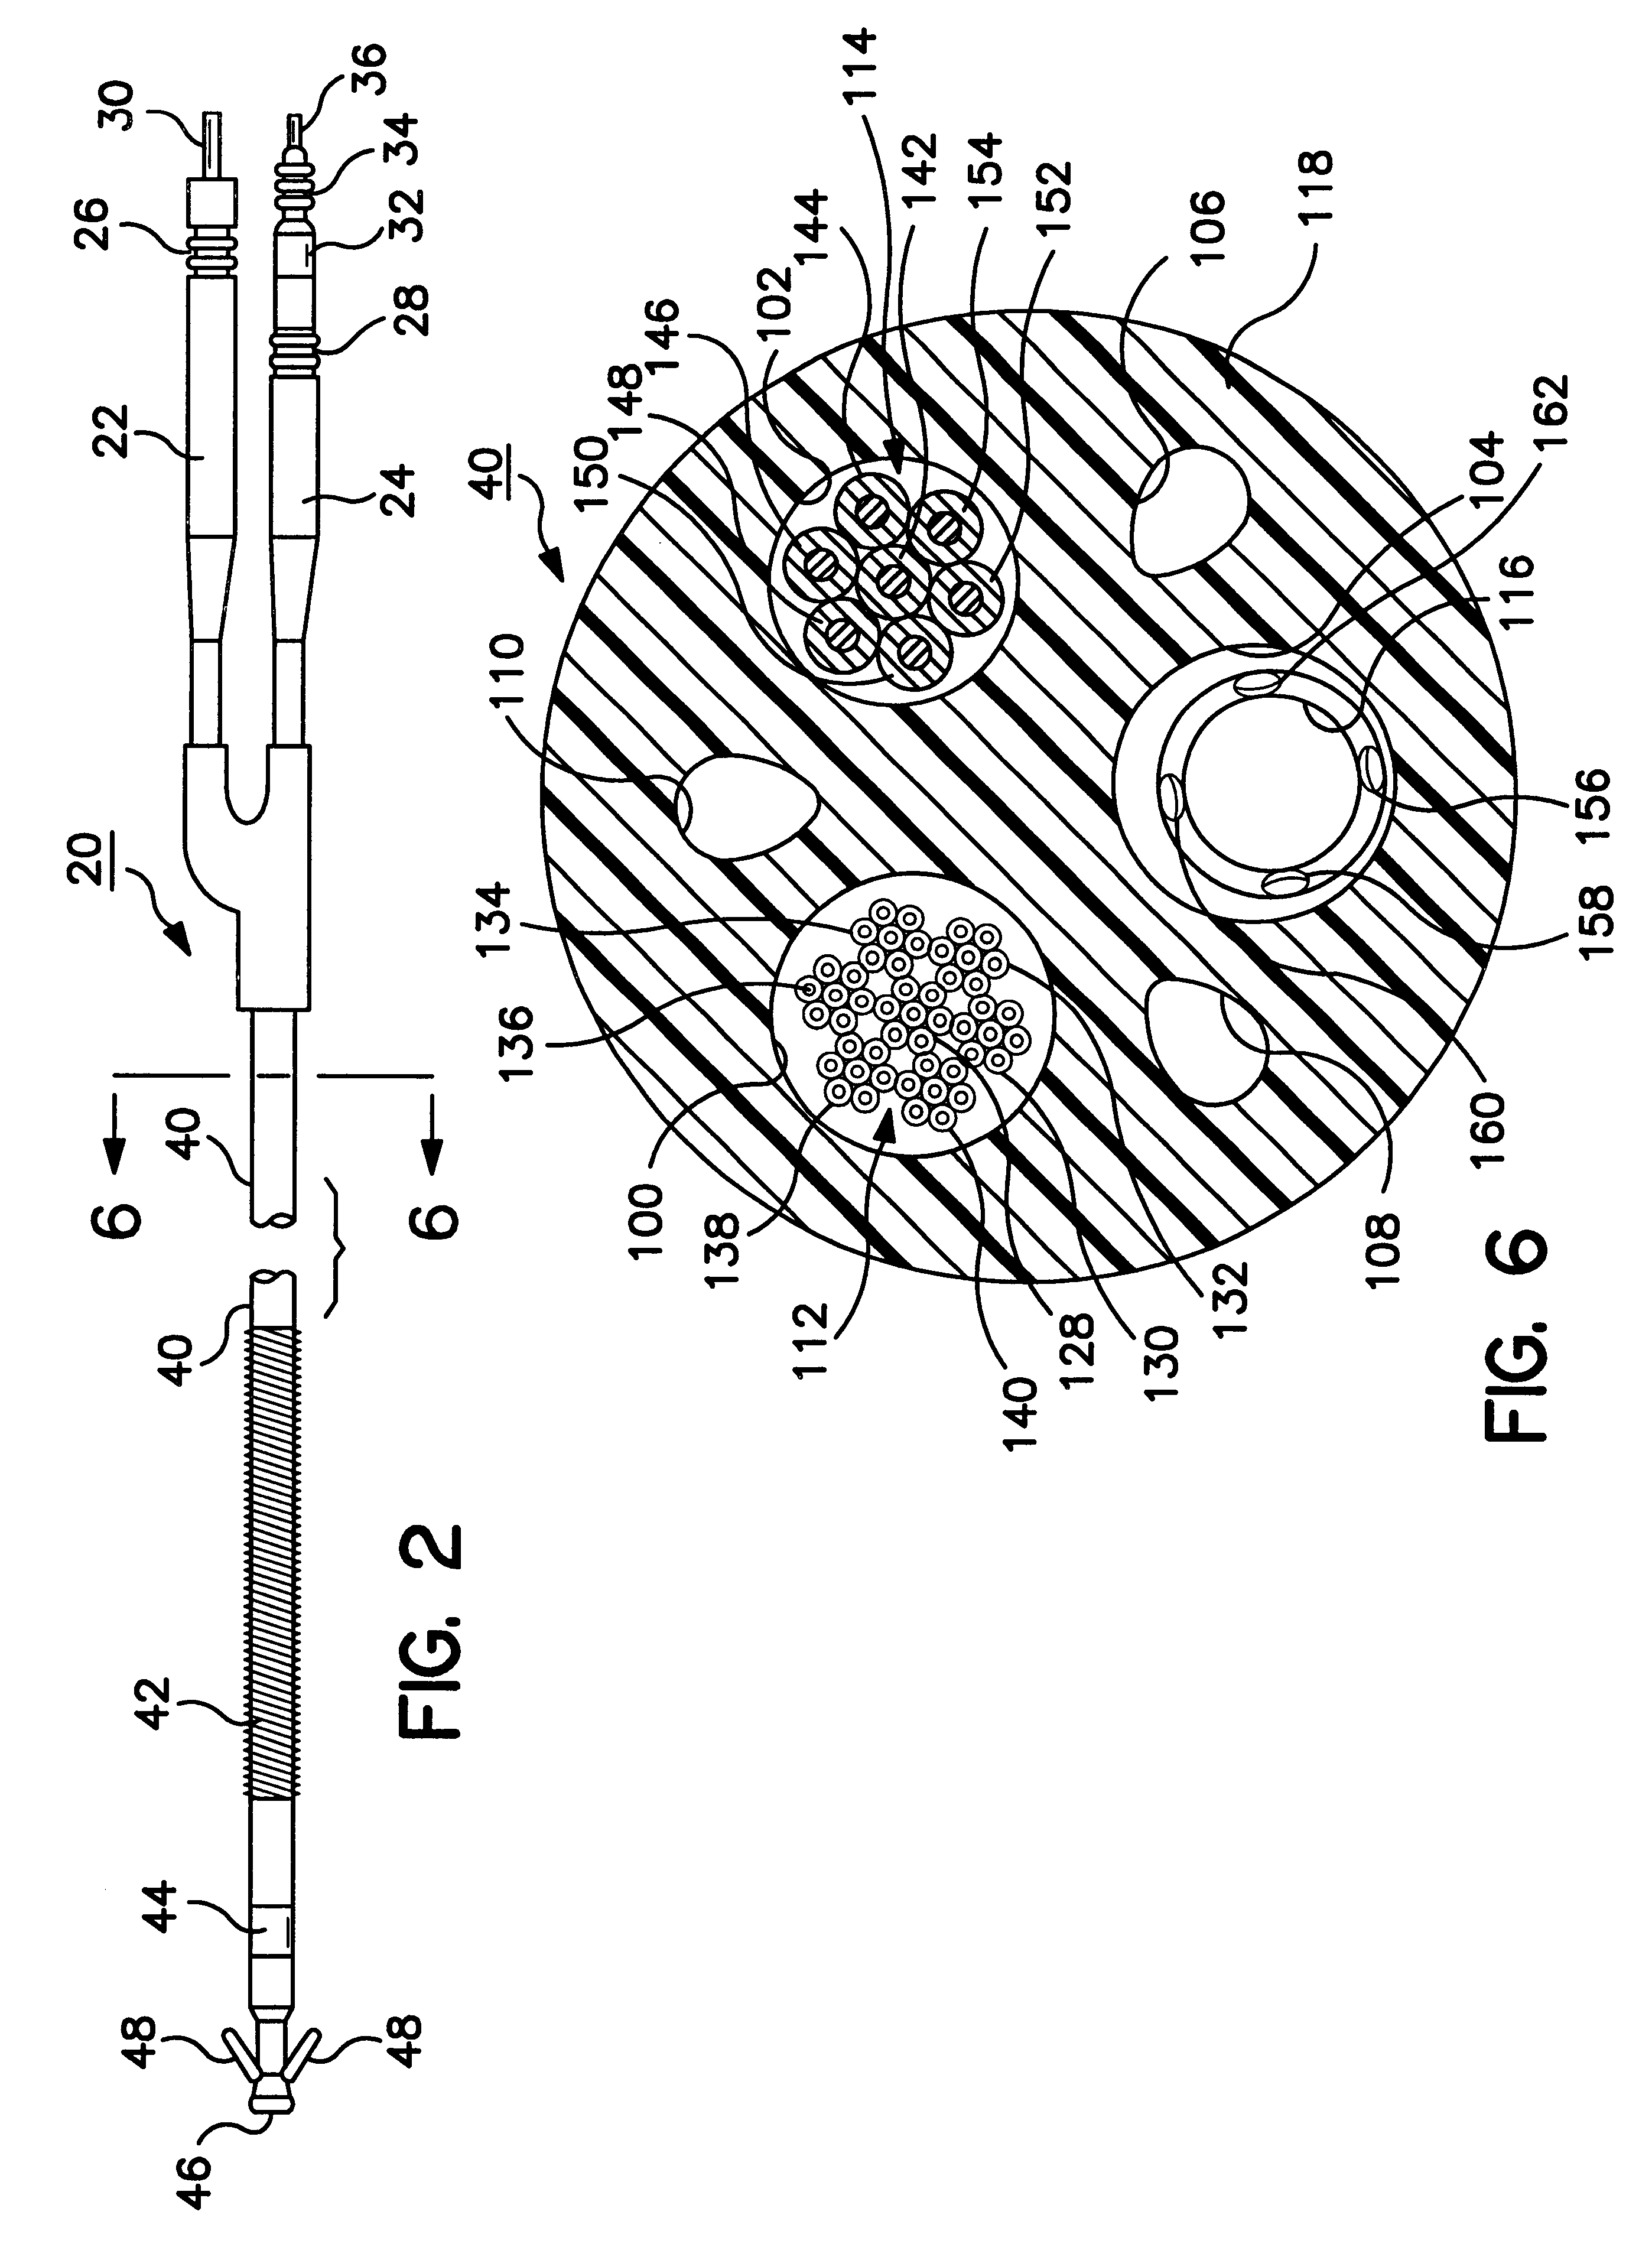 Medical lead conductor fracture visualization method and apparatus